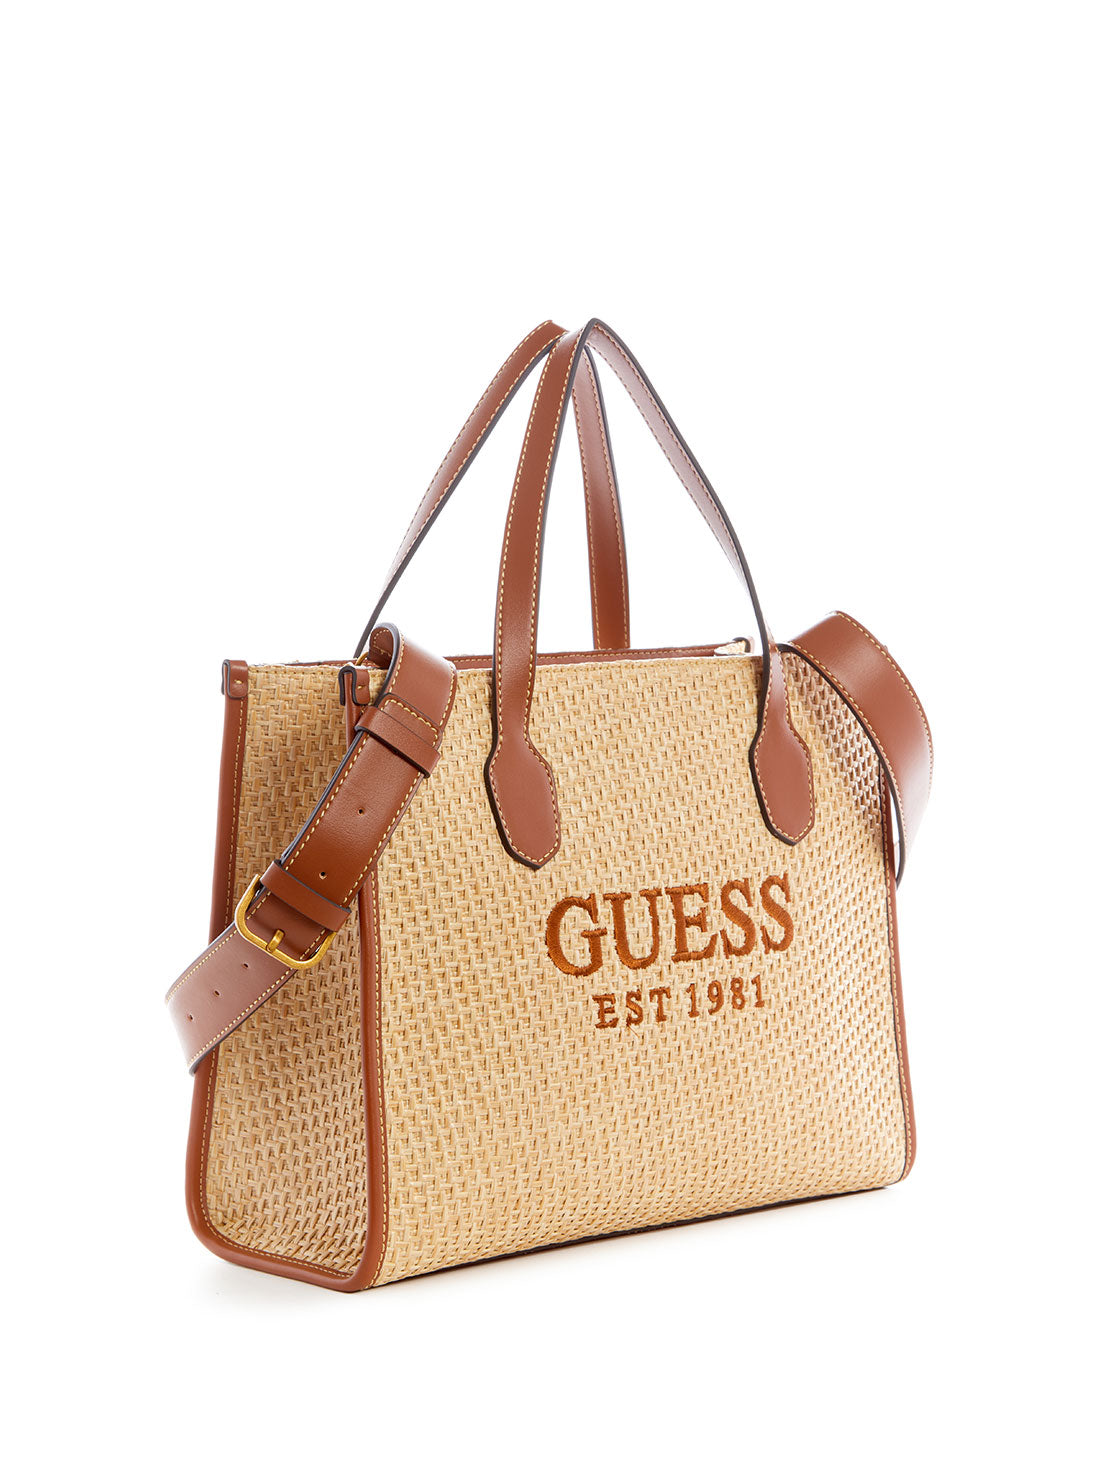 GUESS Women's Cognac Silvana Small Tote Bag WS866522 Front Side View